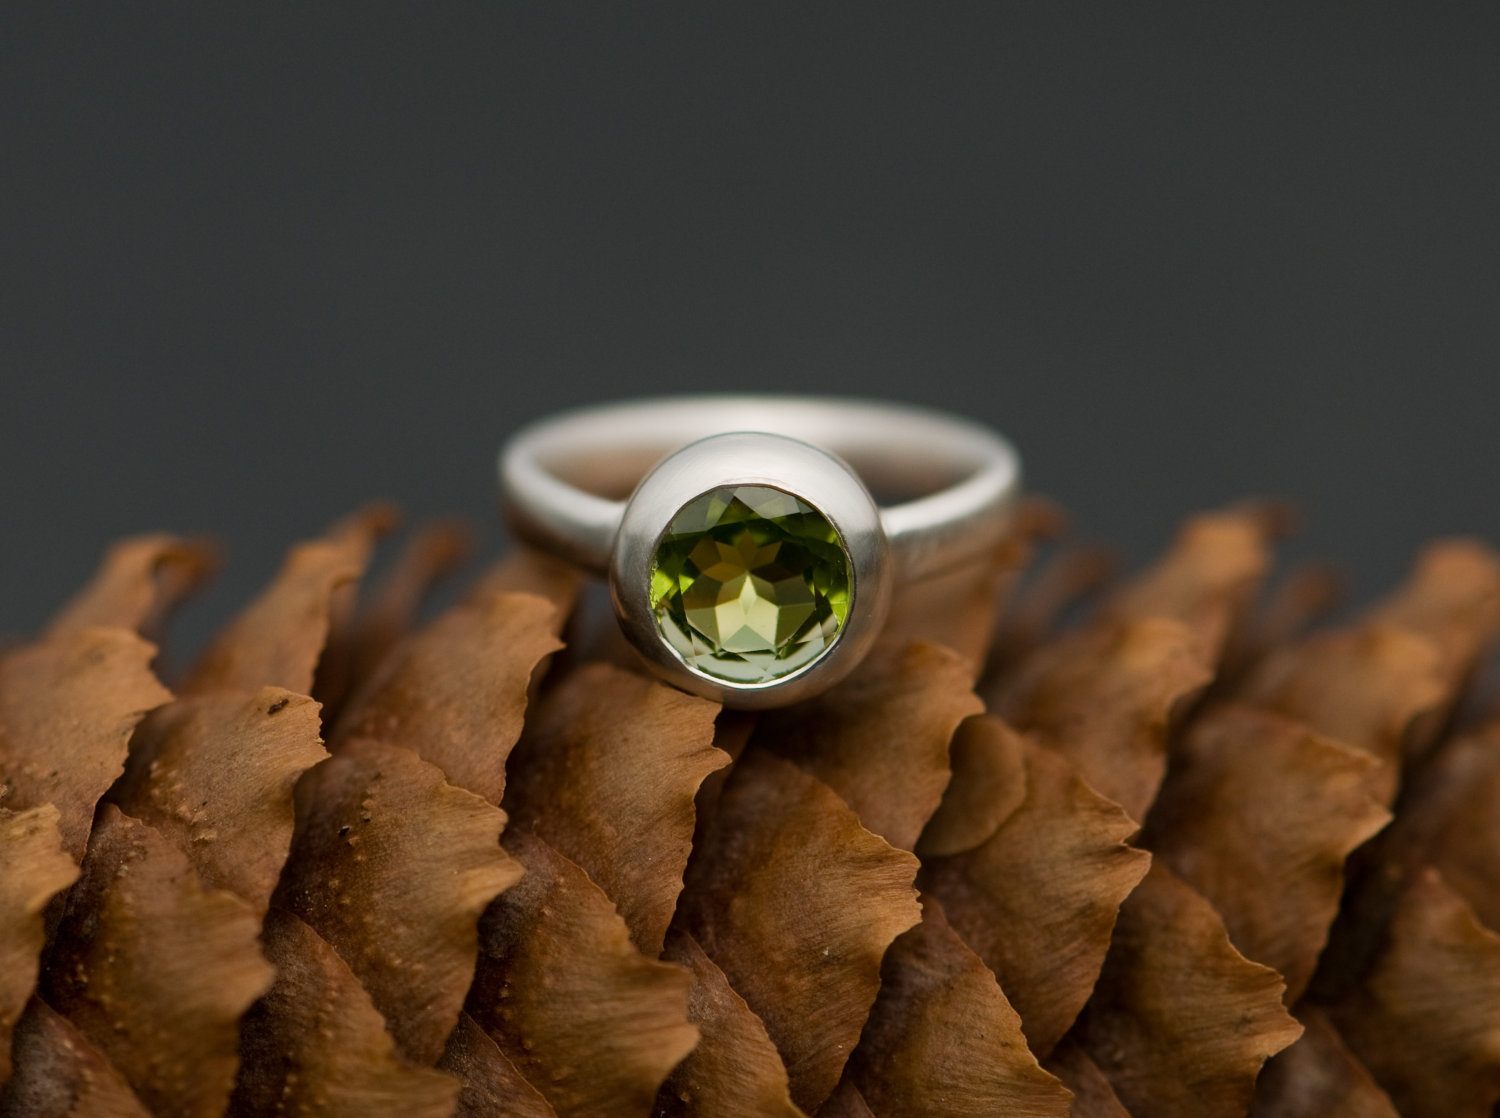 Green peridot solitaire ring in silver